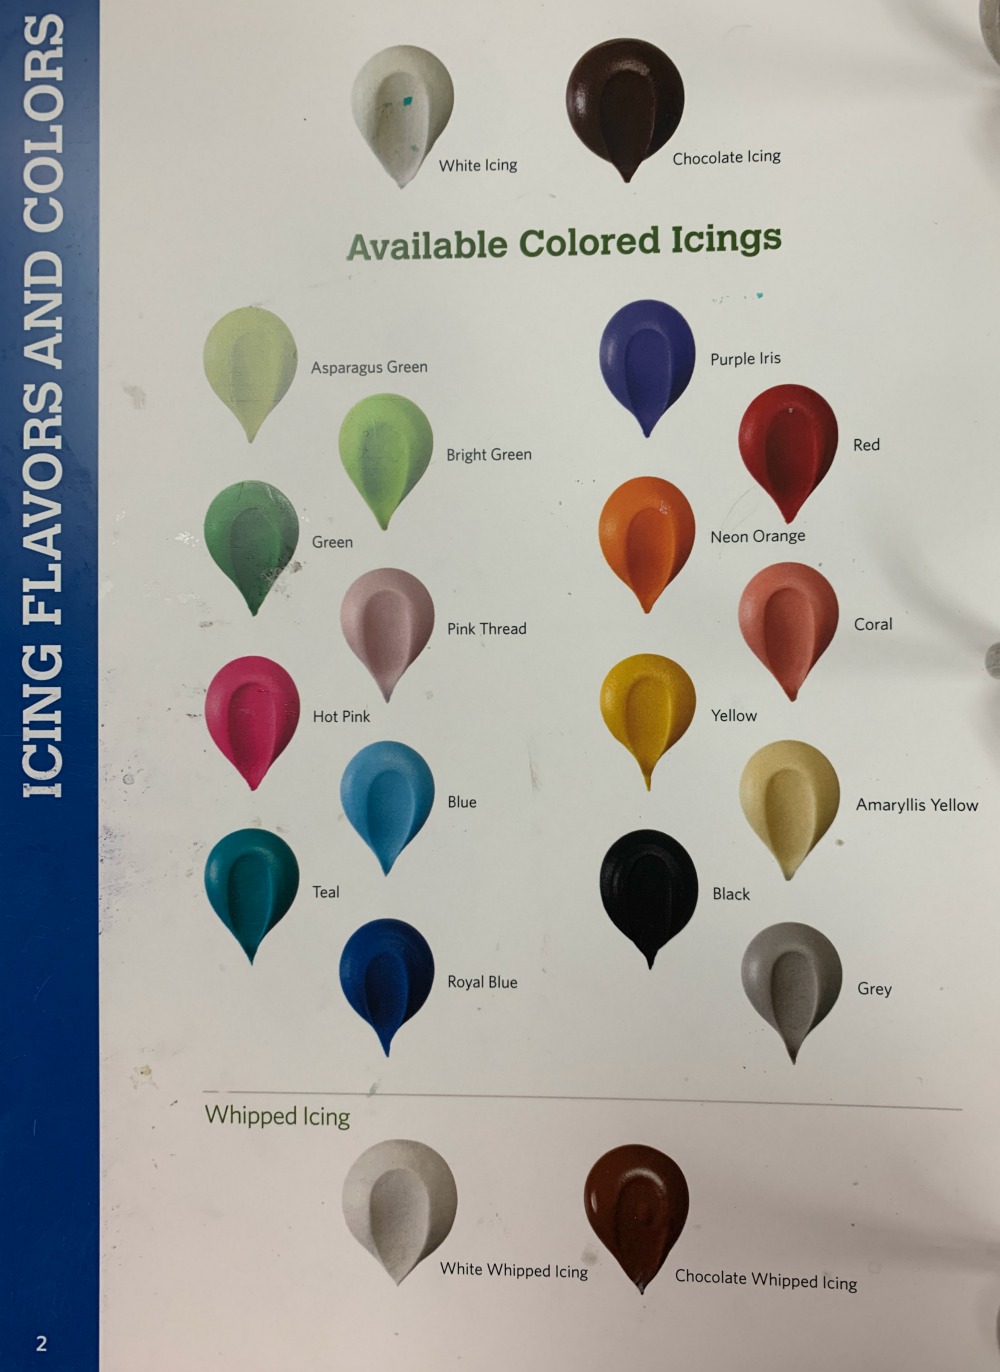 icing flavors and colors from Sam's Club